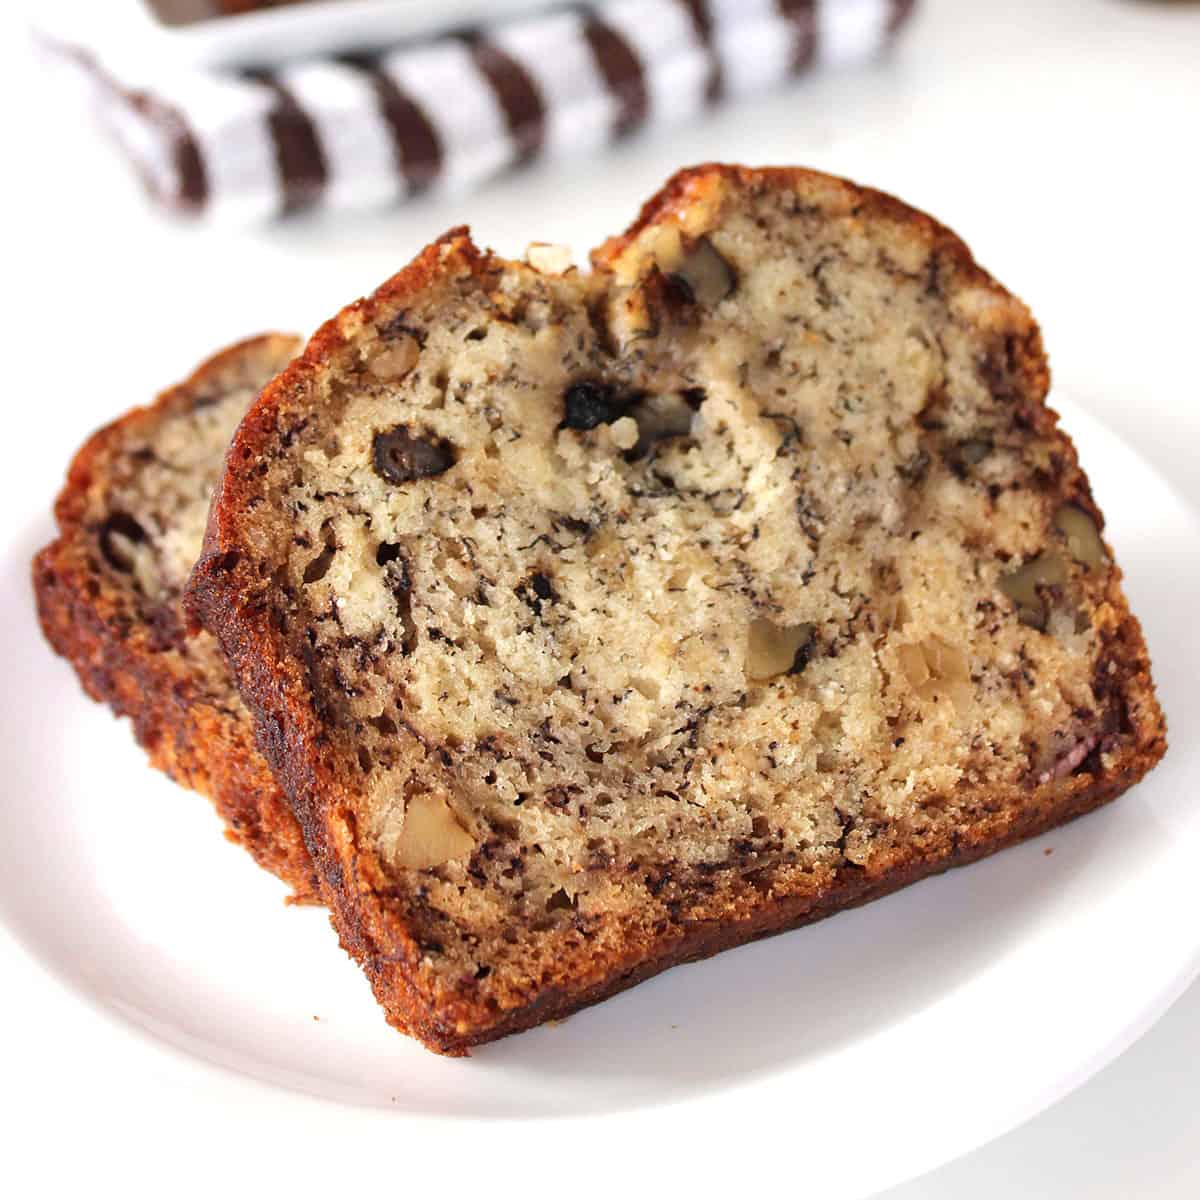 Slices of easy banana bread on a plate